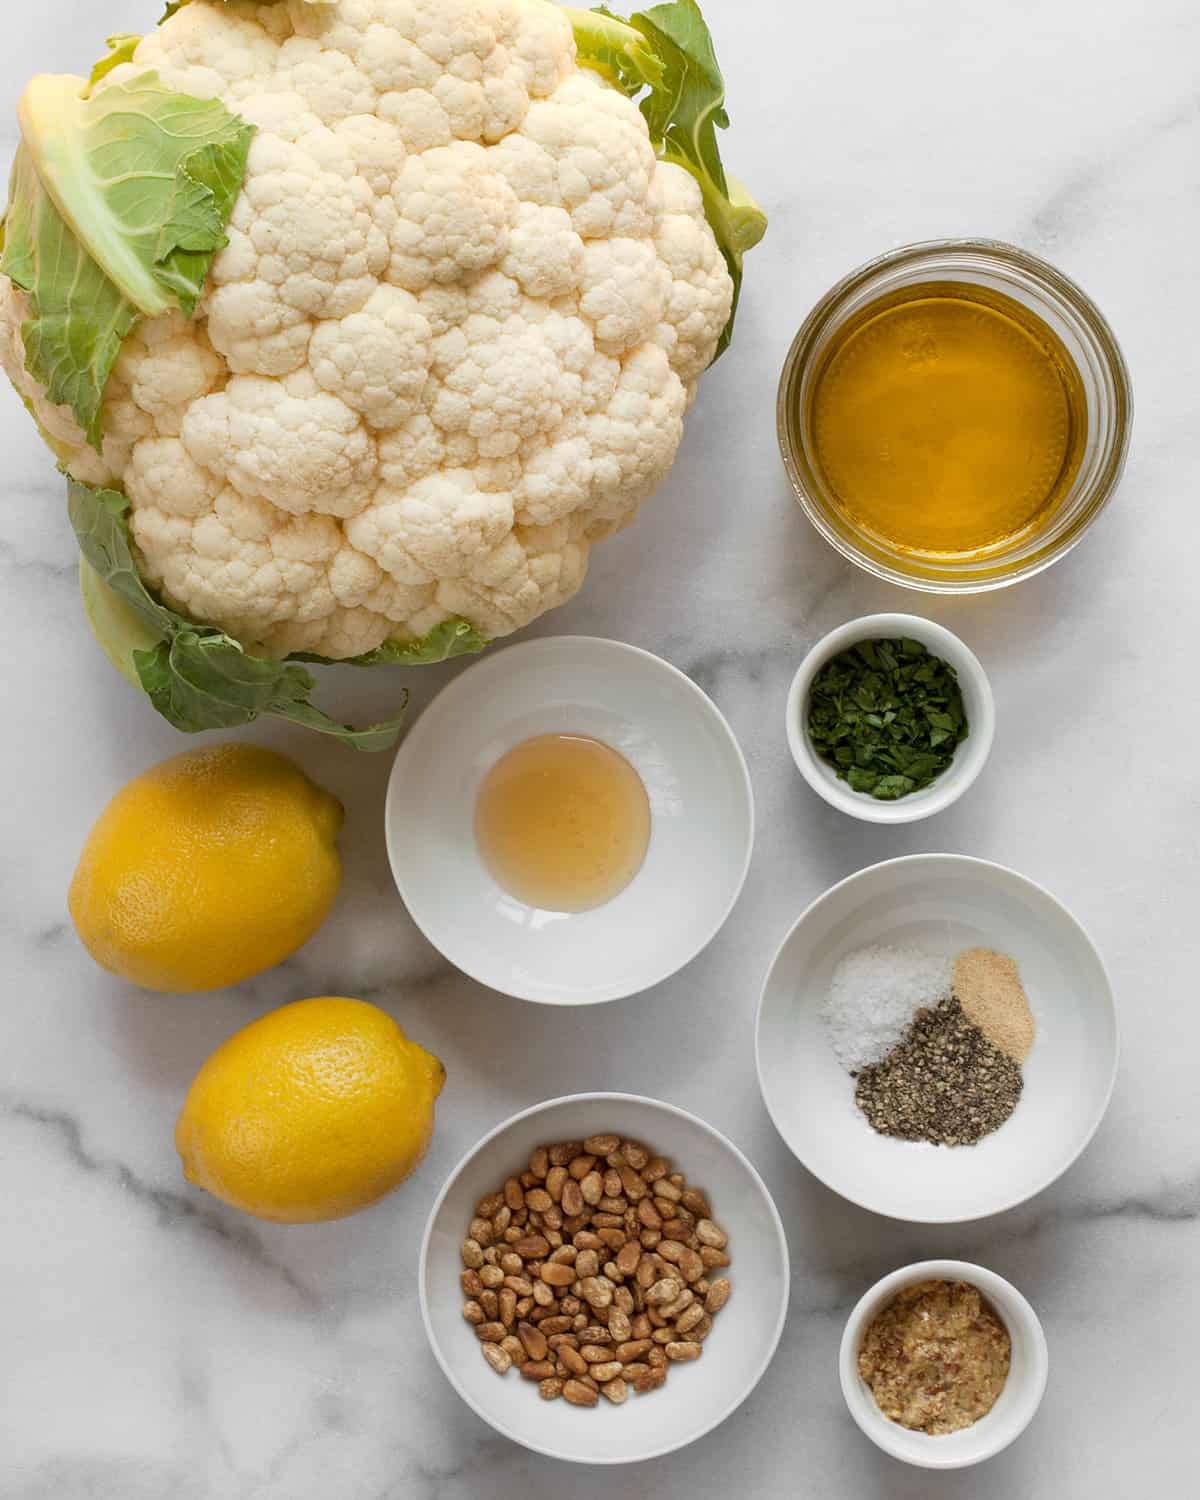 Ingredients including cauliflower, olive oil, honey, mustard, spices, lemon and parsley.